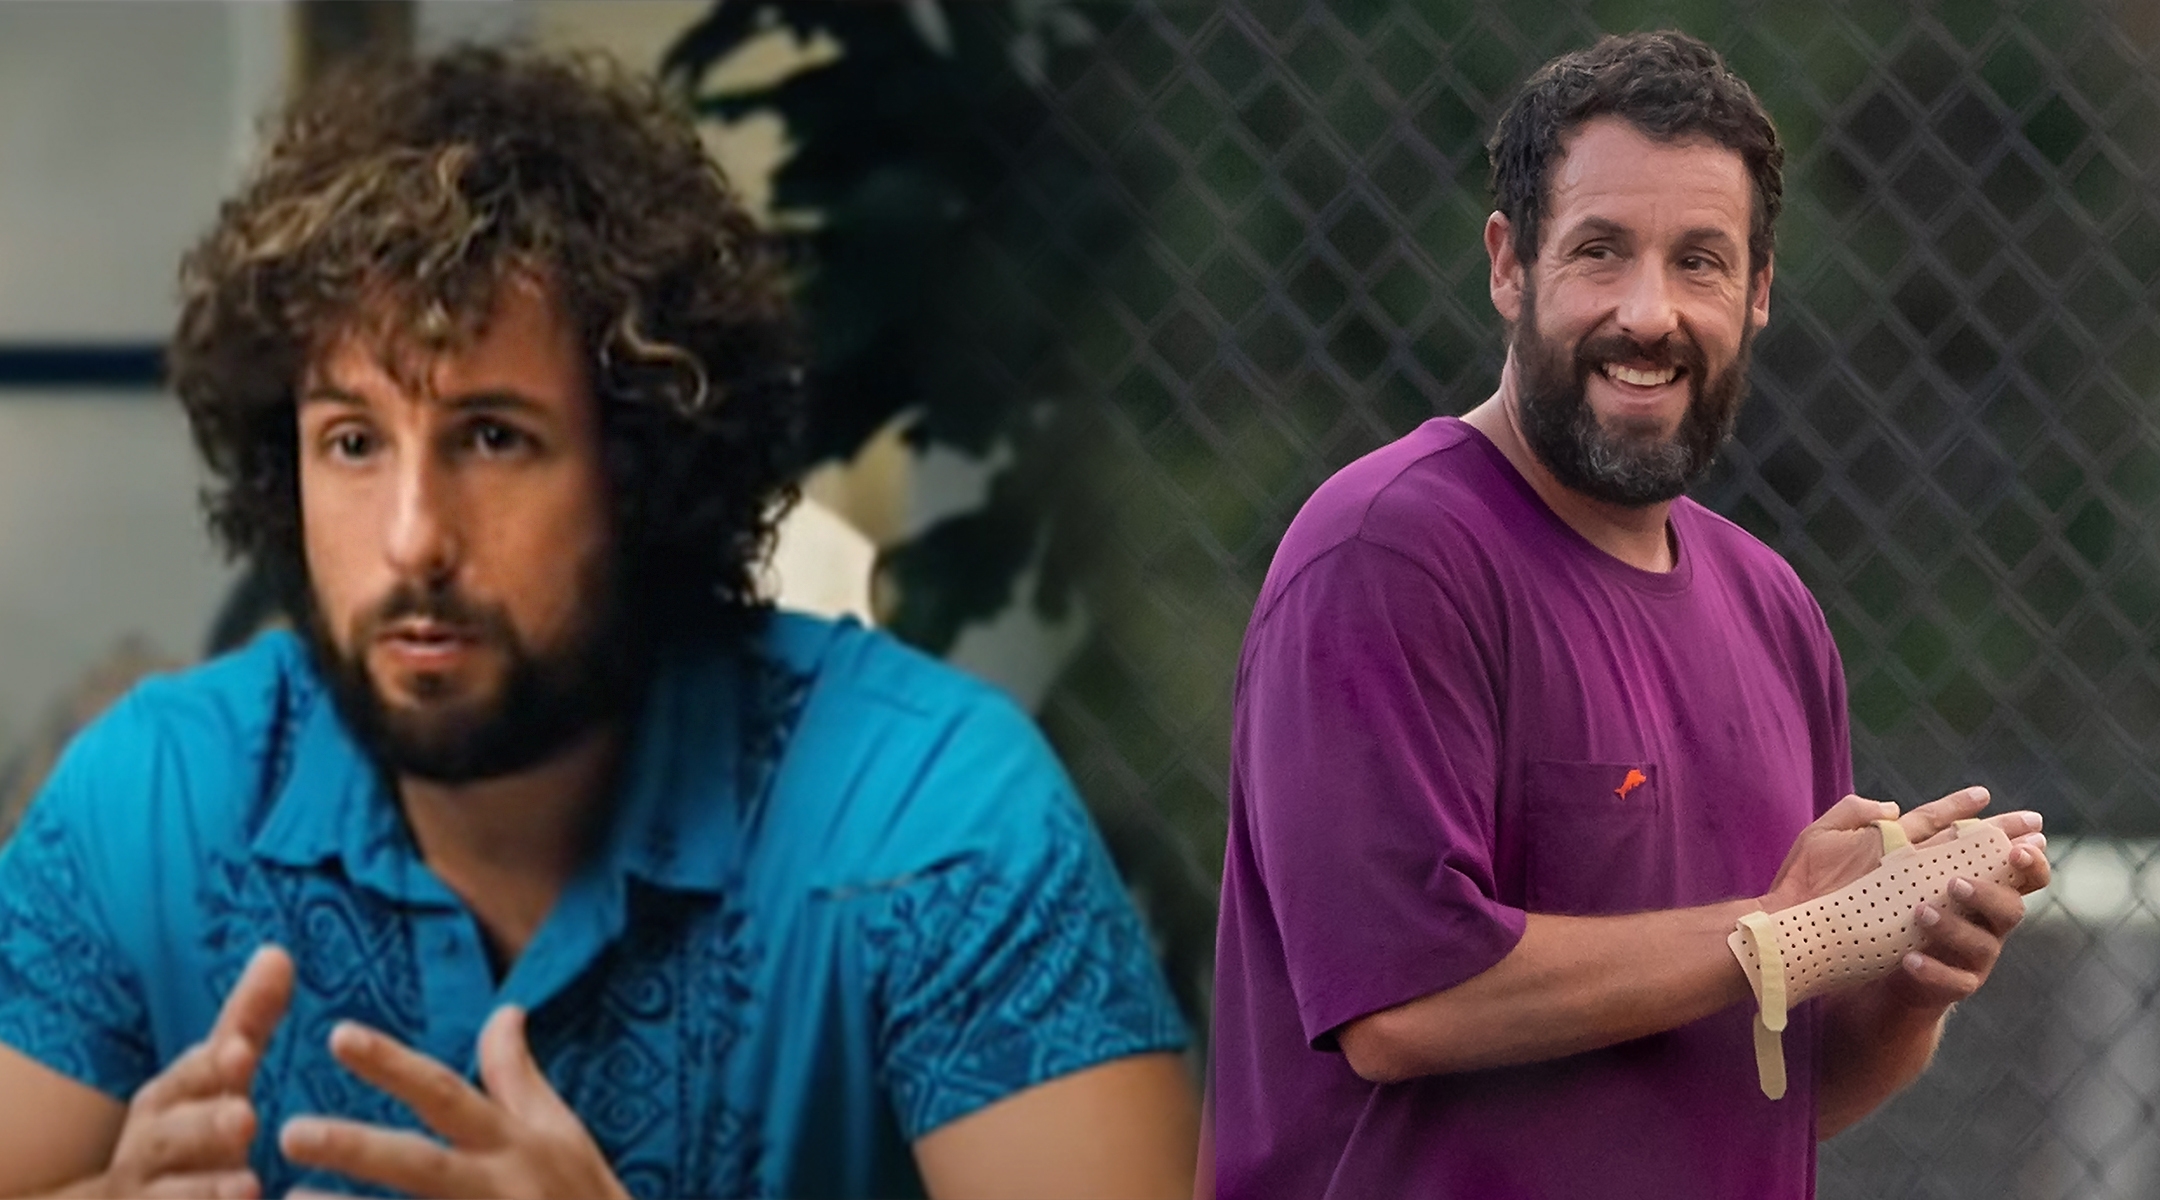 Adam Sandler gave us the Zohan, an IDF soldier with superhuman strength, in 2008’s “You Don’t Mess with the Zohan.” (Gilbert Carrasquillo/GC Images/Getty Images)